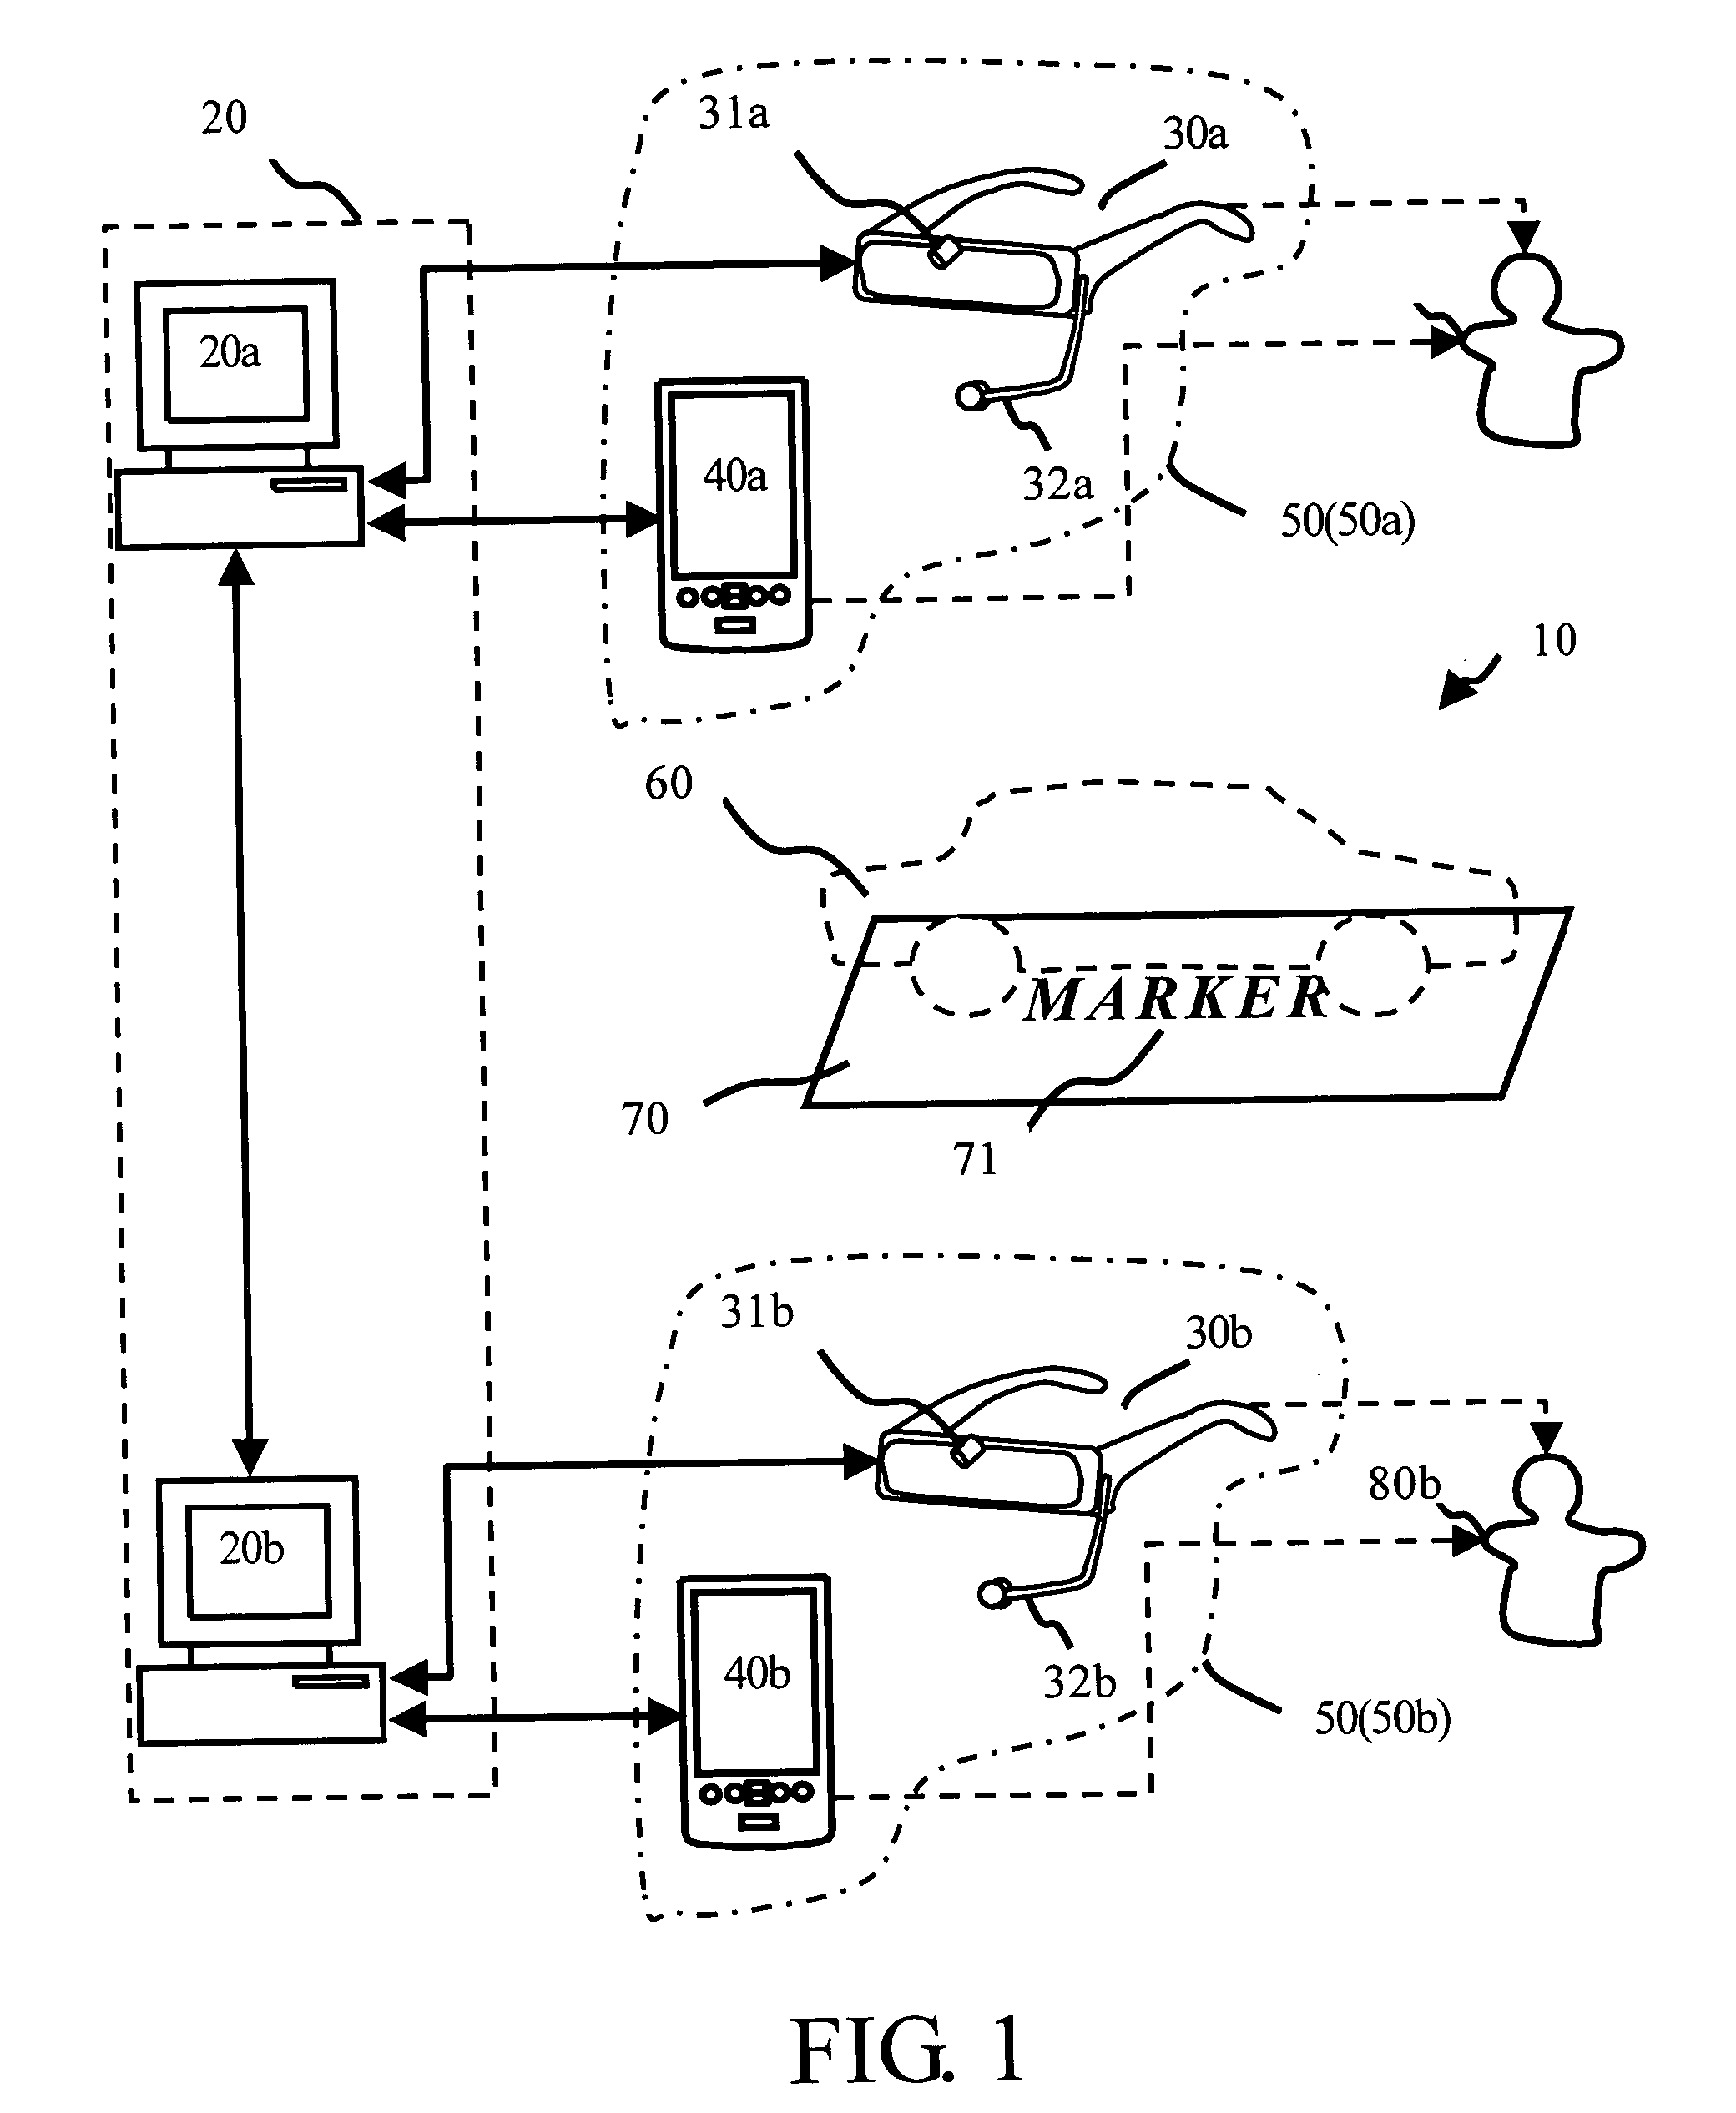 Augmented reality system and method with mobile and interactive function for multiple users